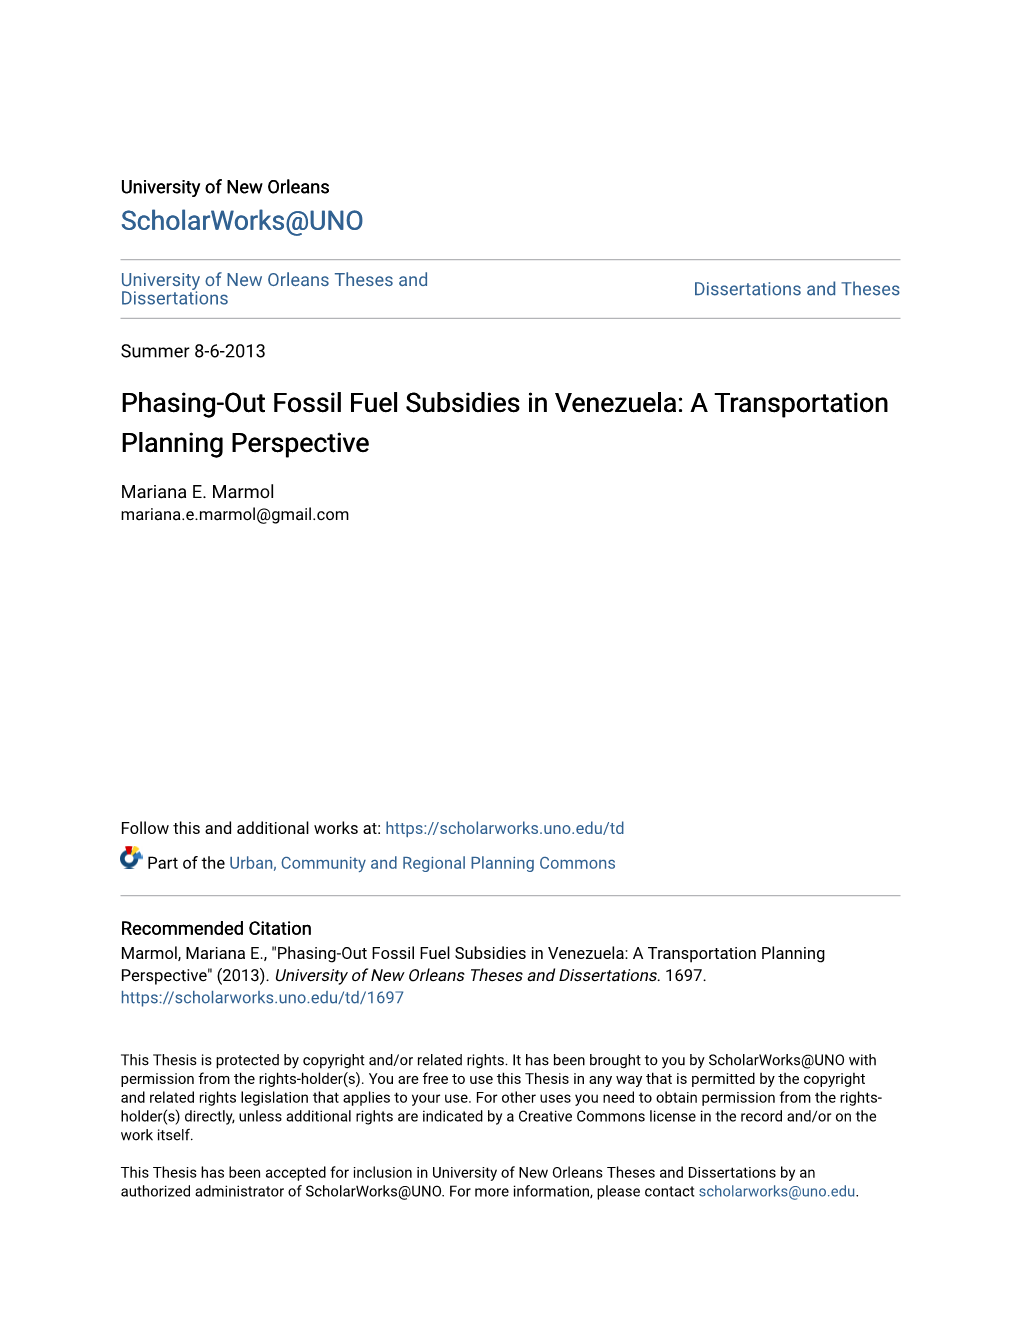 Phasing-Out Fossil Fuel Subsidies in Venezuela: a Transportation Planning Perspective